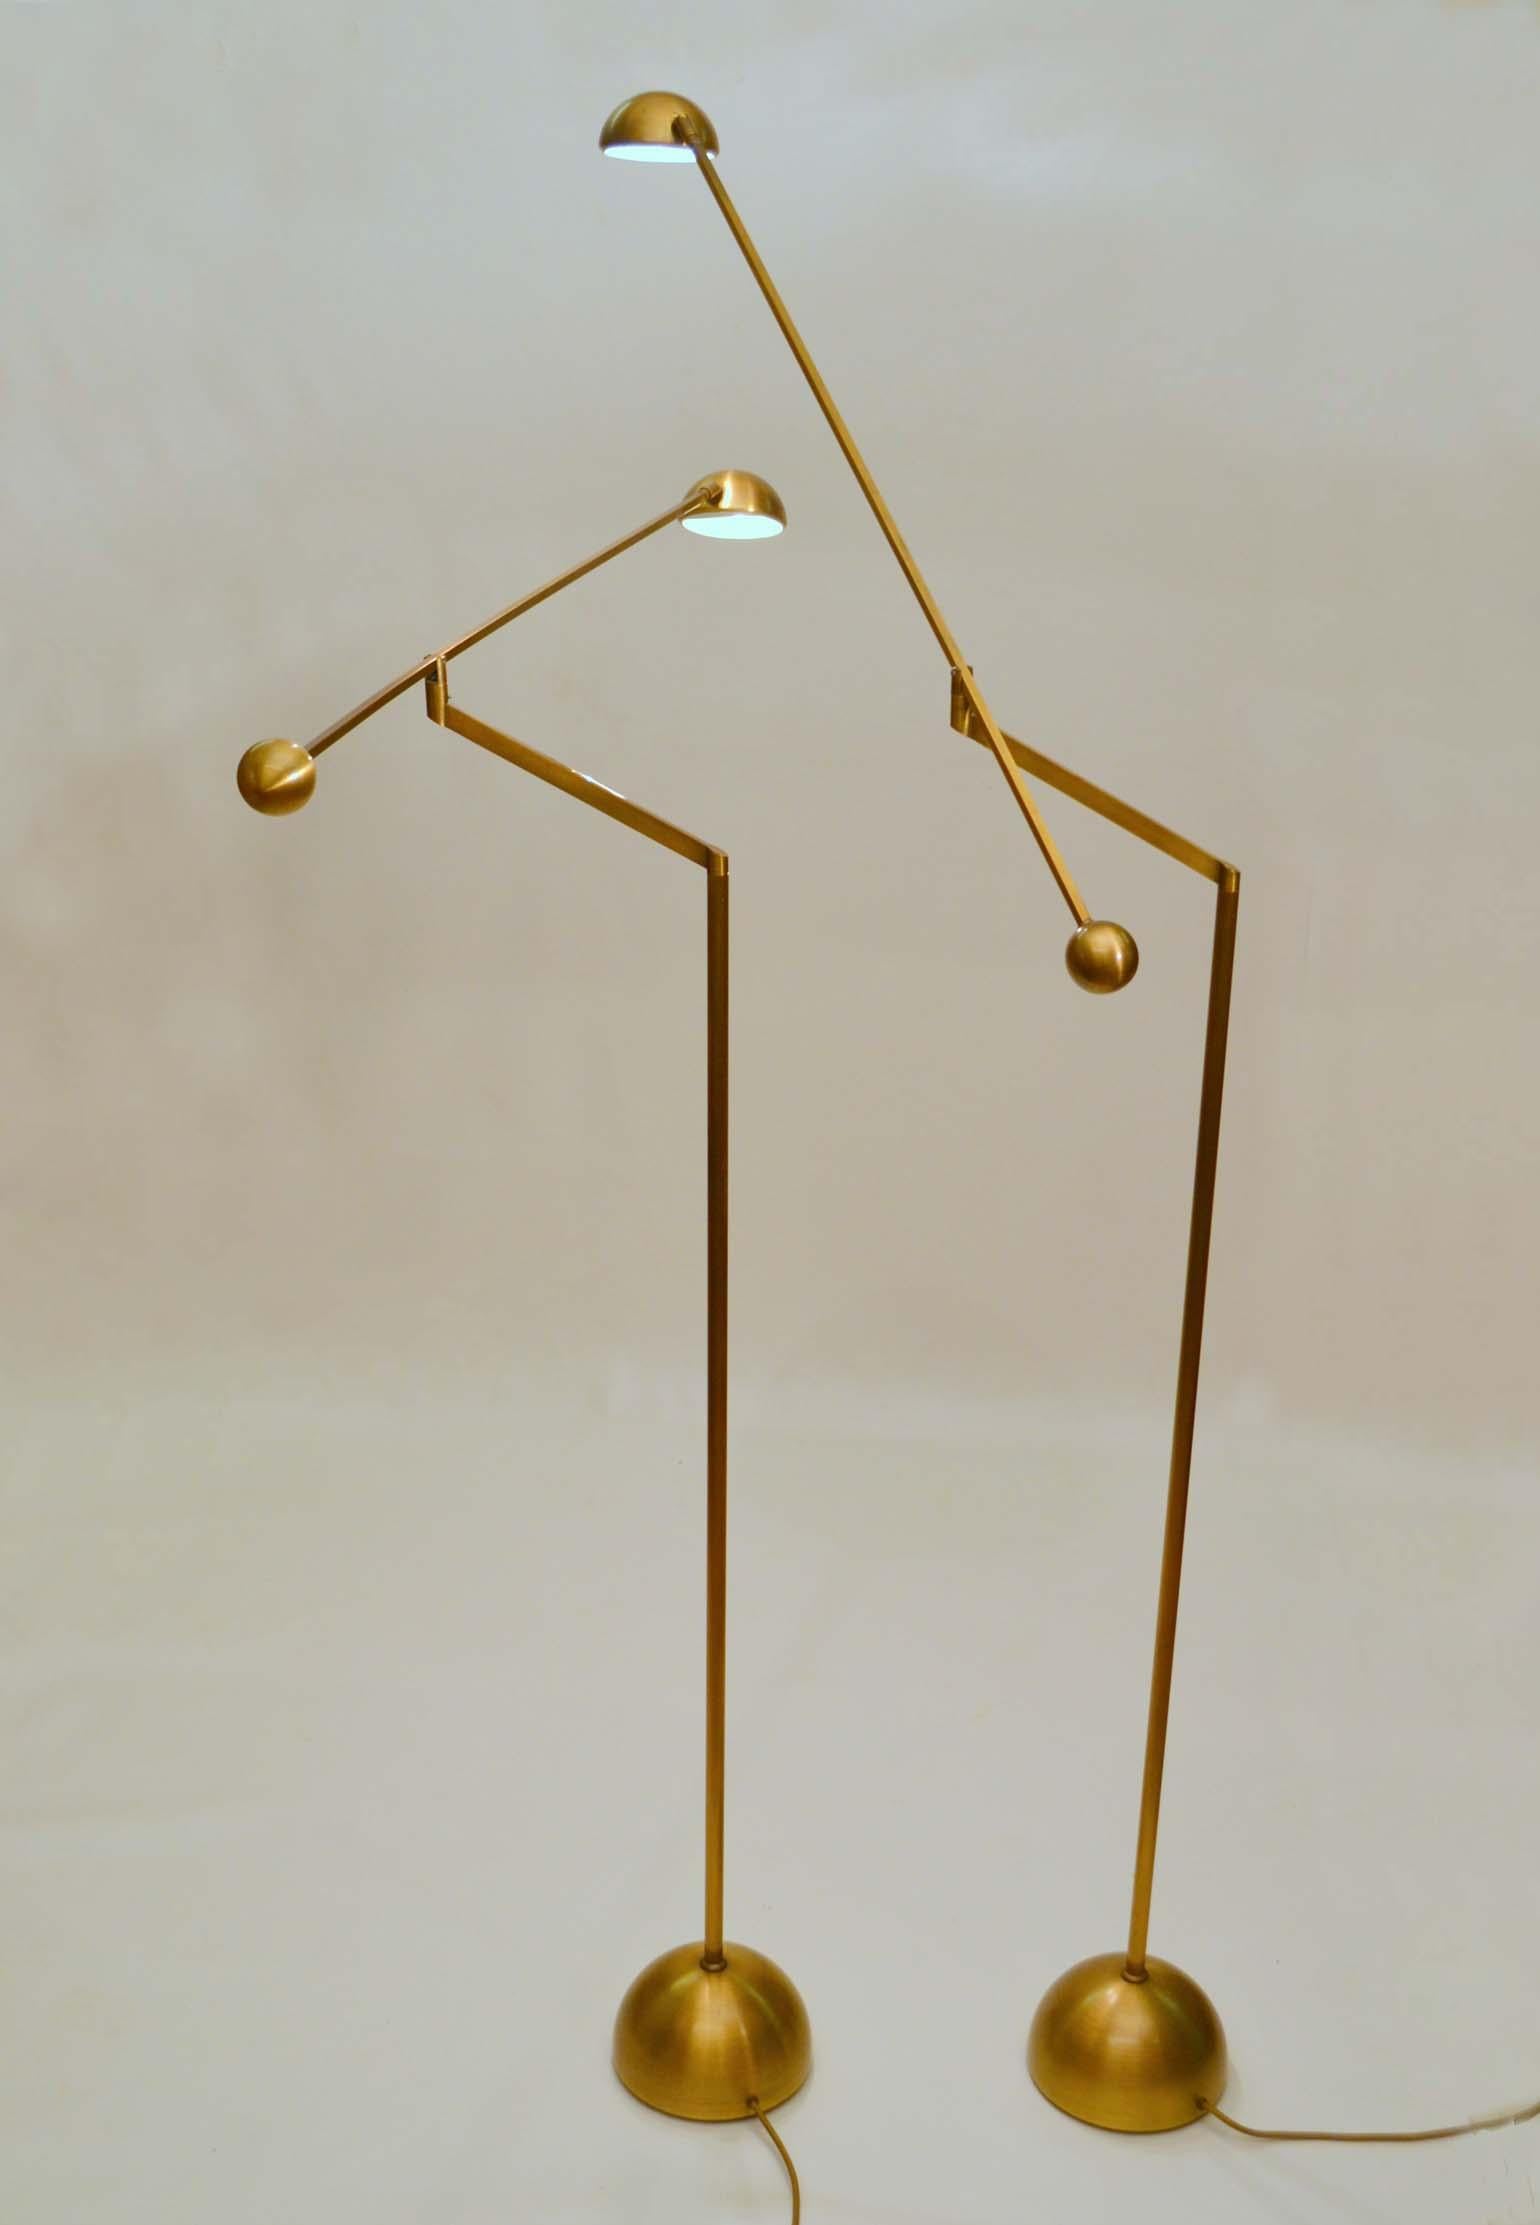 Pair of brass minimal counterbalance floor lamps are attached to a long arm holding a spherical bronze light source that is adjustable to 180 degrees. The arm sits on an angled stand which can also be pivoted at 180 degrees. This gives the lamps